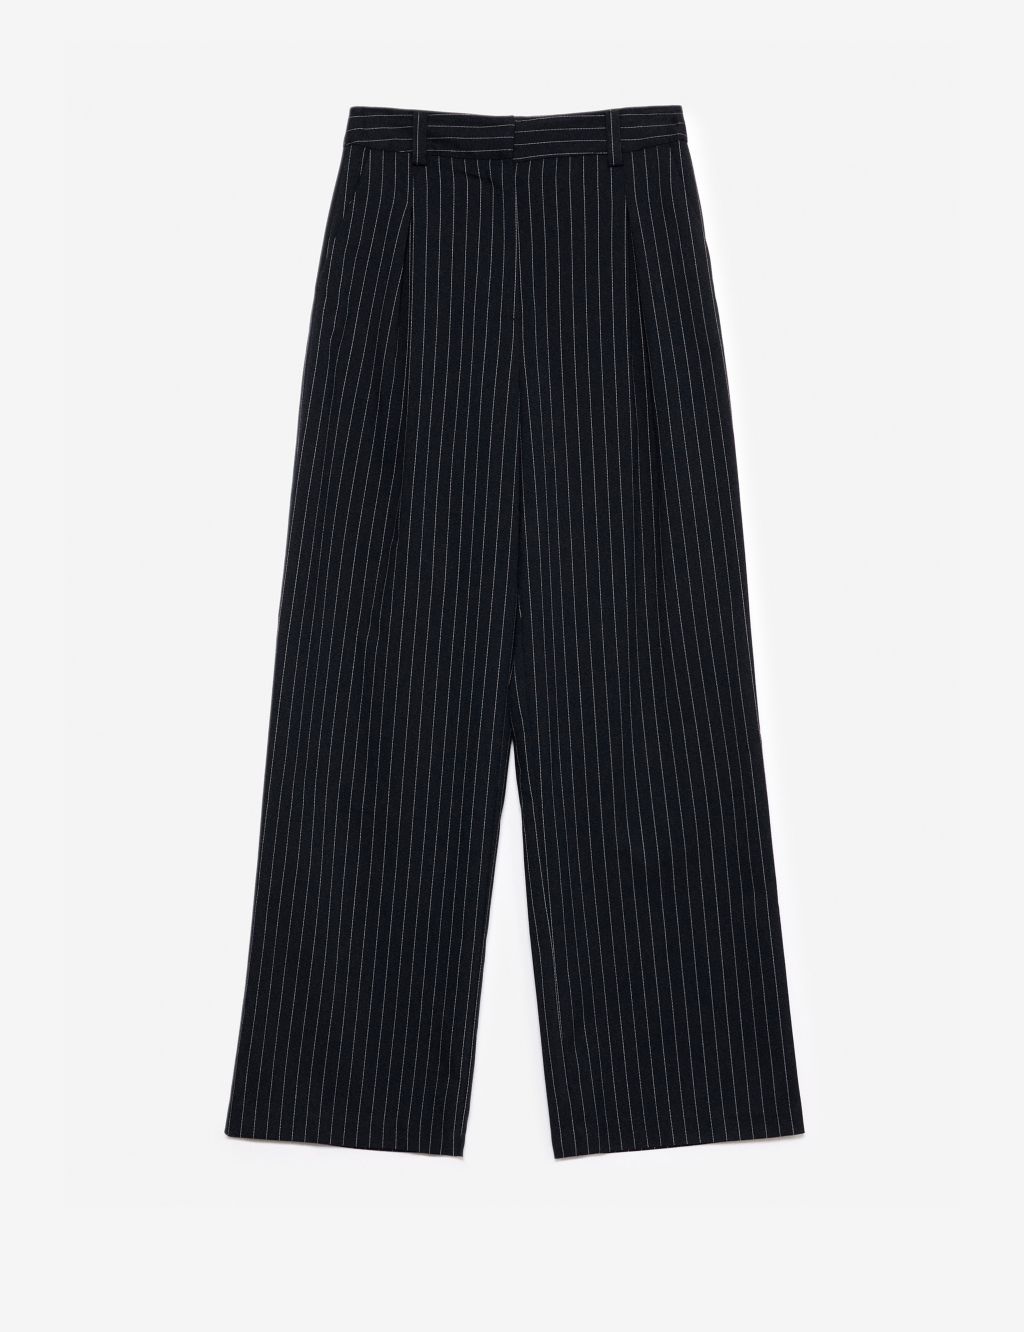 Pinstriped Wide Leg Trousers image 2